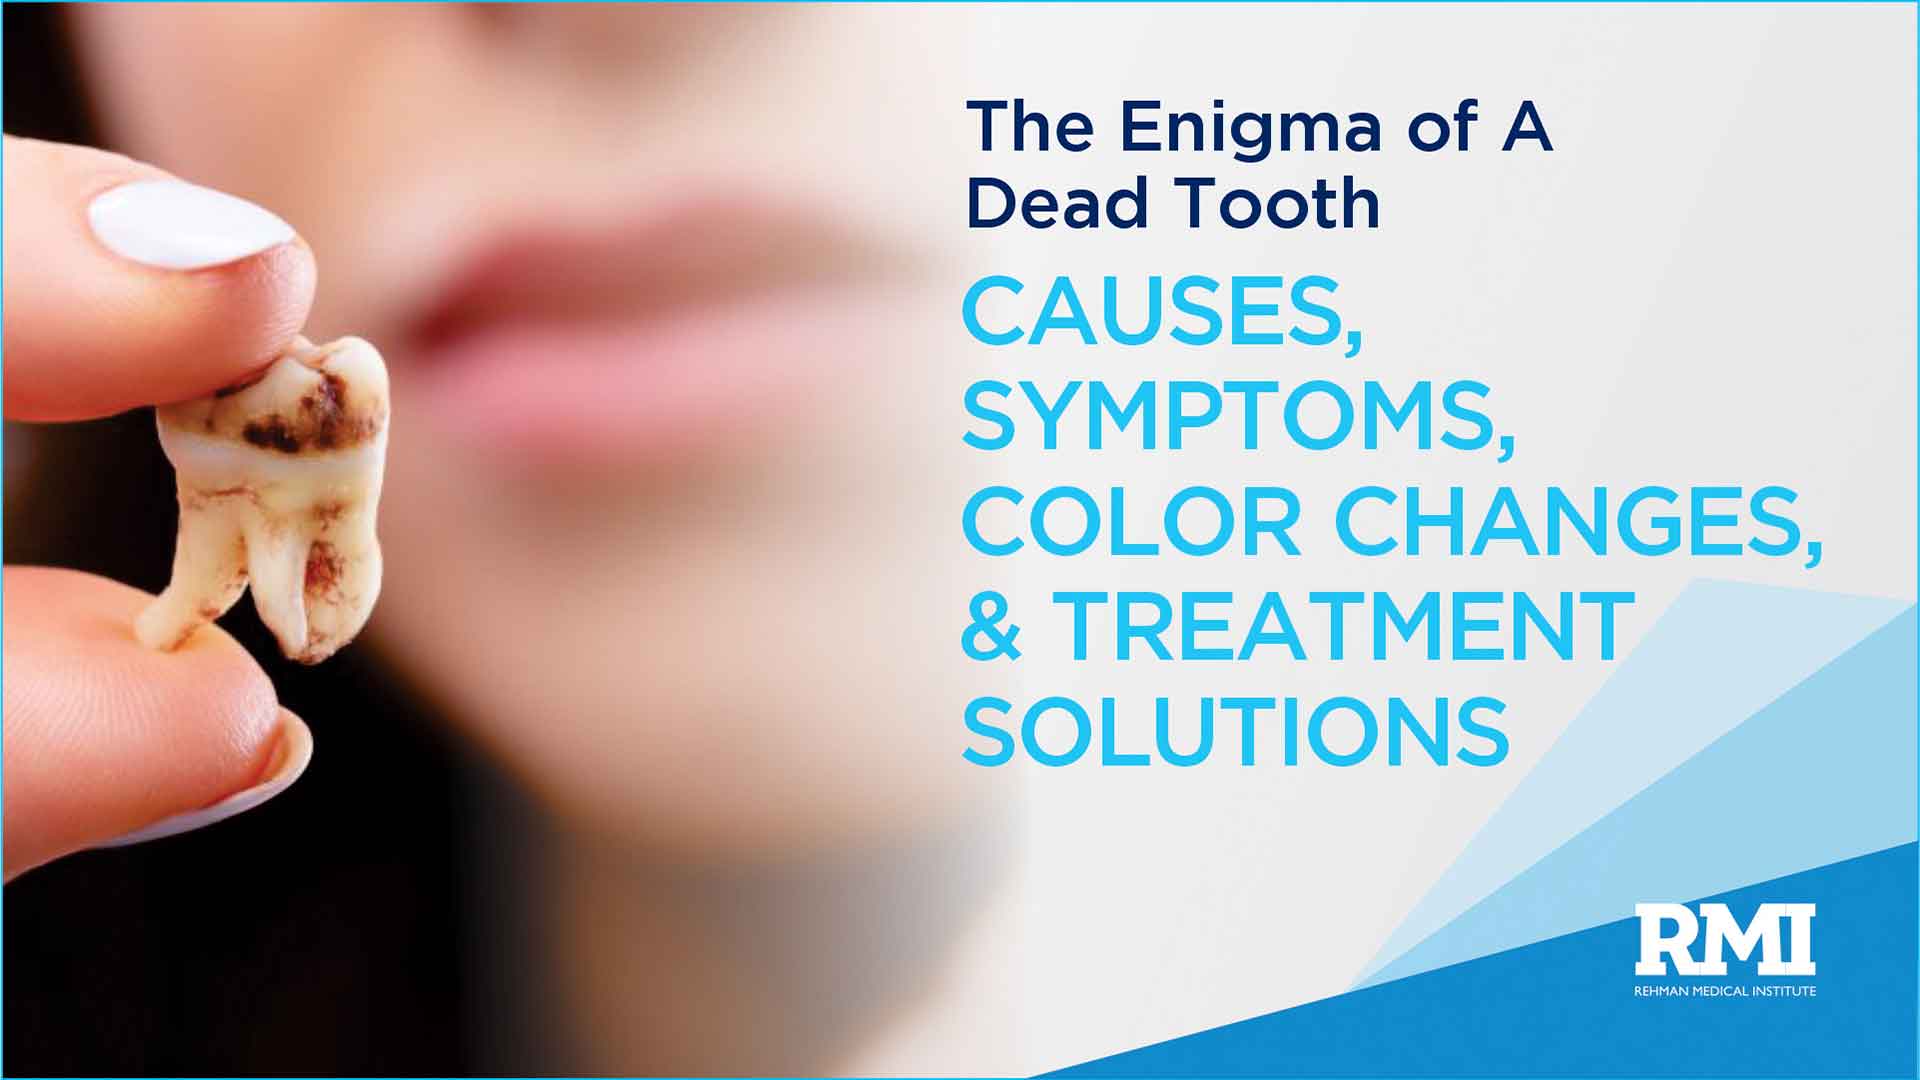 The Enigma of a Dead Tooth: Causes, Symptoms, Color Changes, and Treatment Solutions